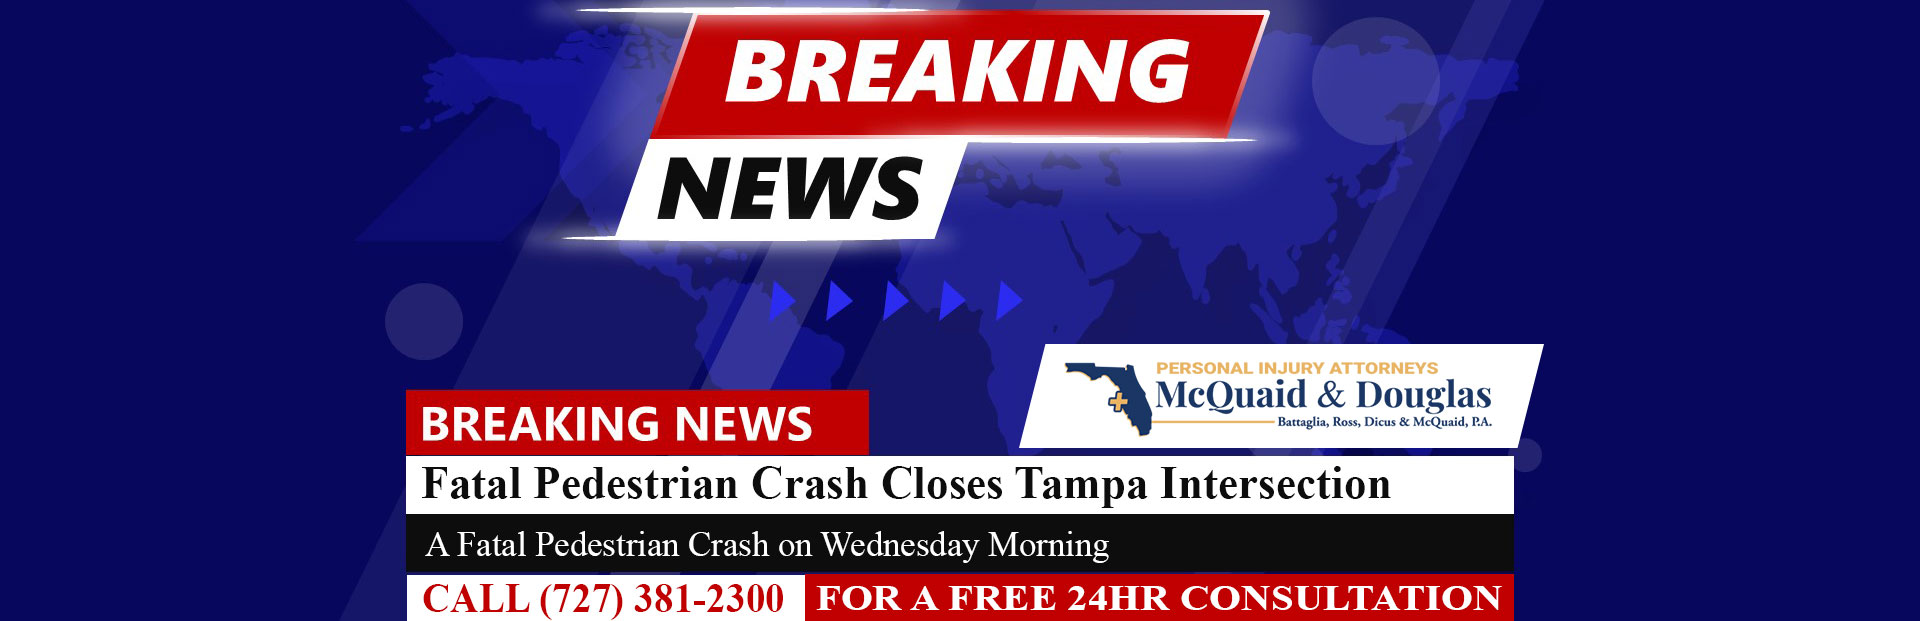 [03-02-24] Fatal Pedestrian Crash Investigation Closes Tampa Intersection for 2 Hours